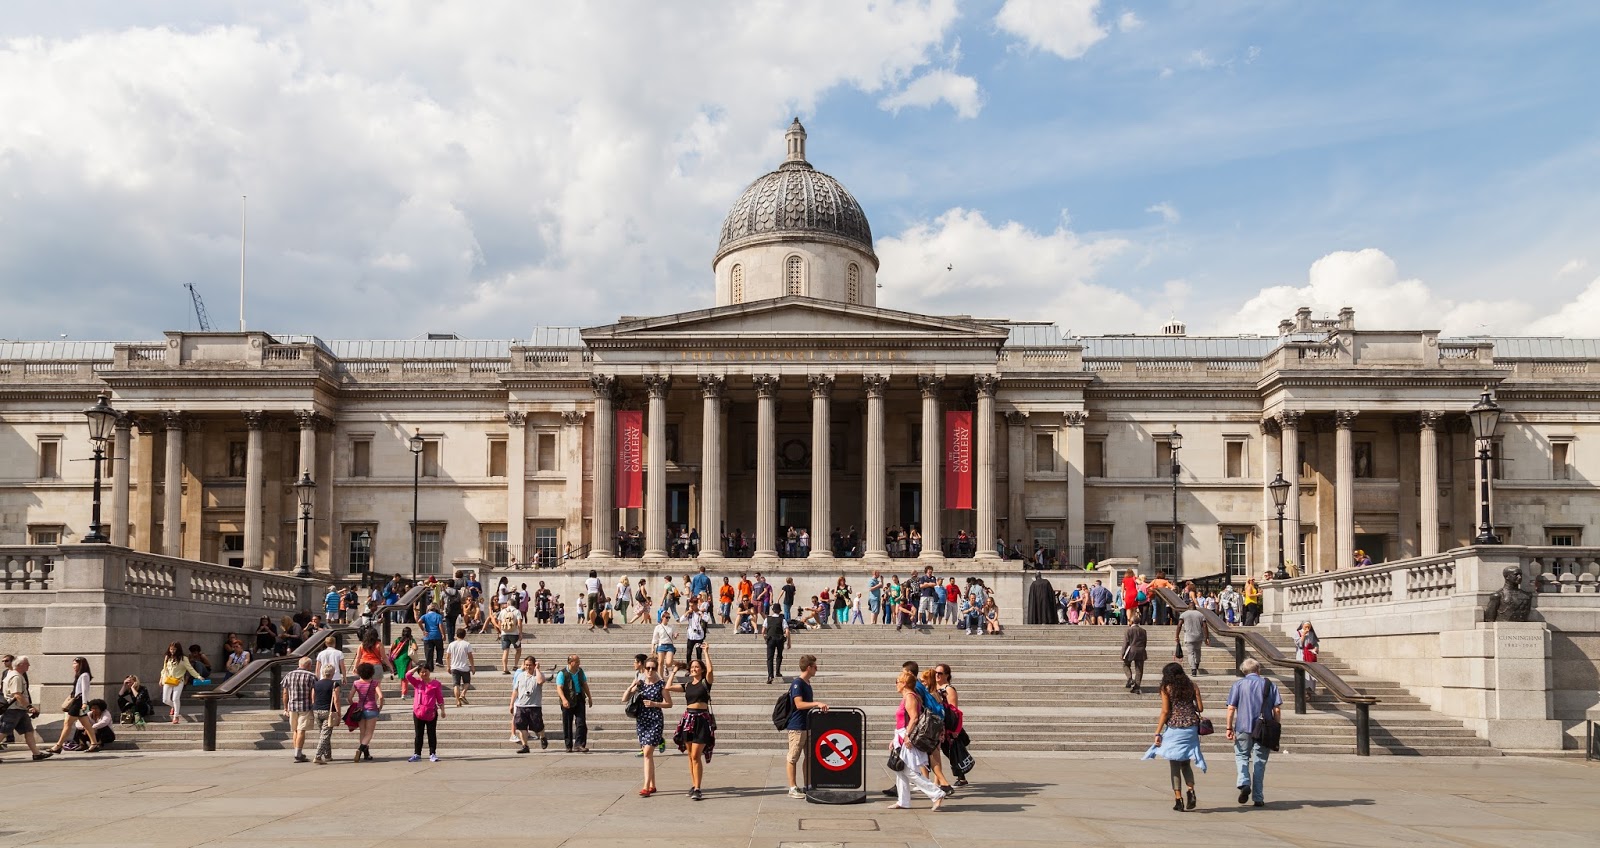 These Are The 25 Best Museums In The World - National Gallery